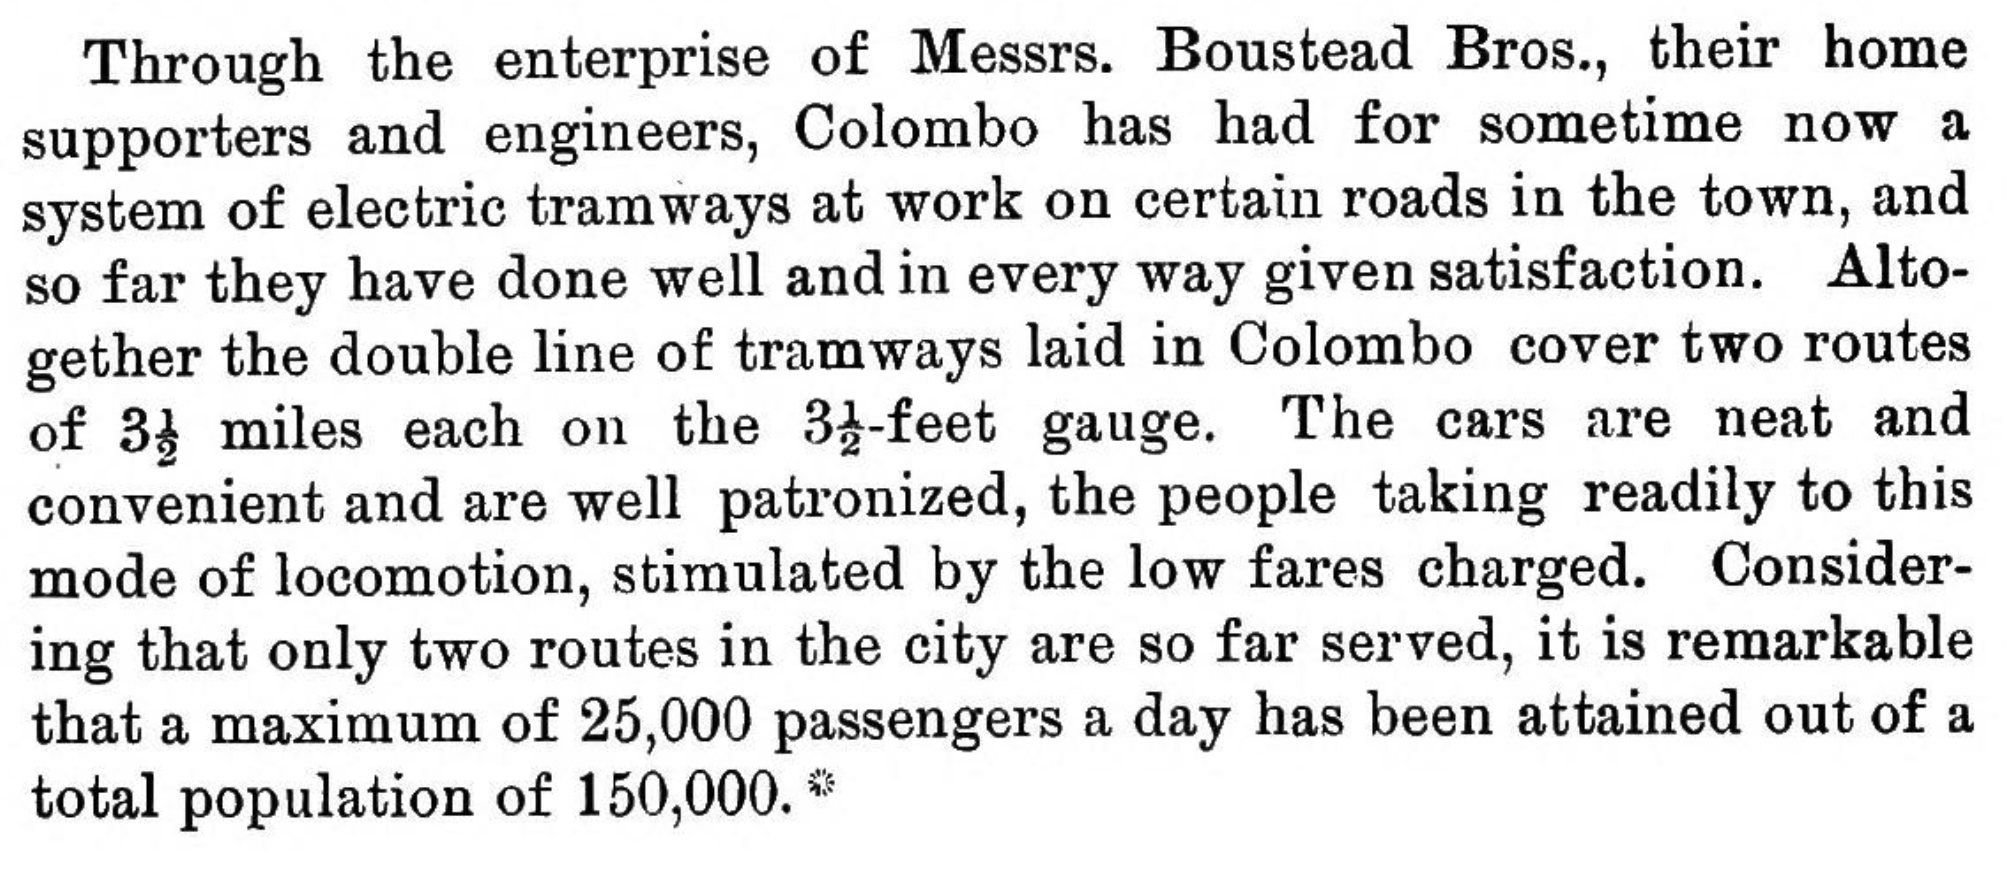 An excerpt from “Ceylon in 1903” by John Ferguson C.M.G, Vice President of the Ceylon Chapter of the Royal Asiatic Society - Given that this is an officer of His Majesty’s Civil Service describing life in the colonies; several grains of salt are advised.